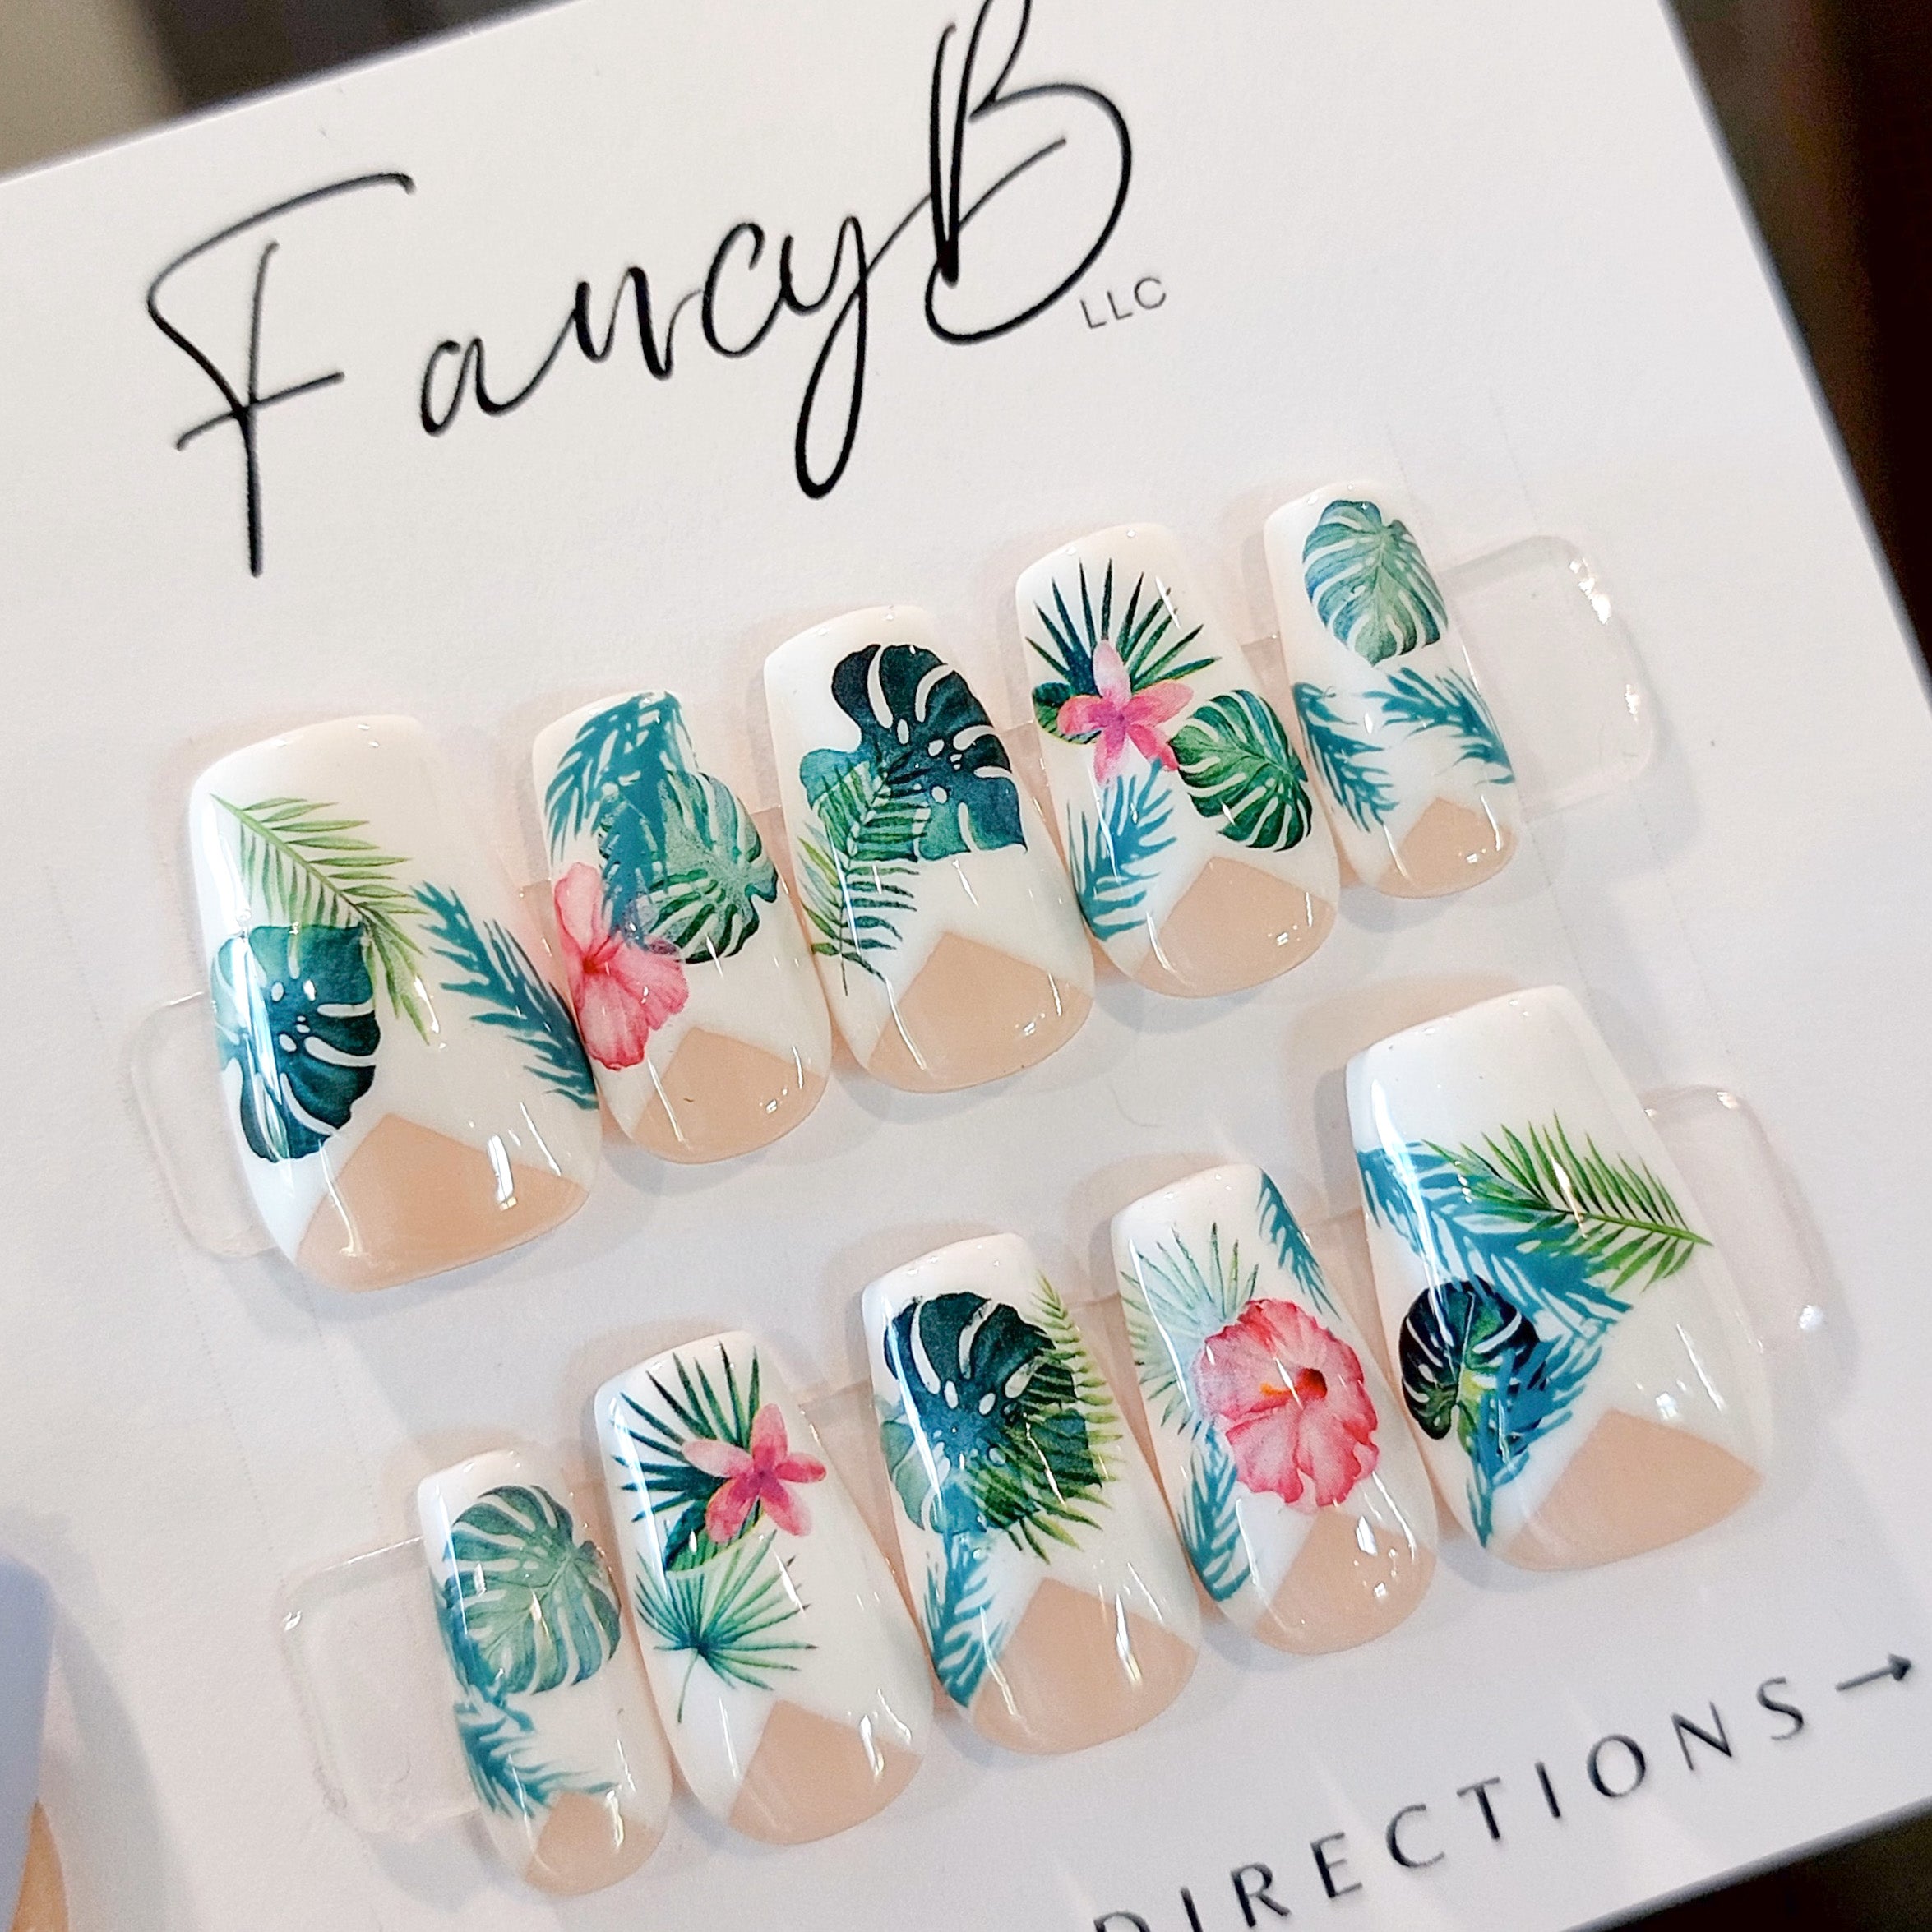 Custom press on nails. Tropical press on nails with monstera leaves and palm leaves in fuscia and teal colors, a low french v-cut and short coffin nail shape.